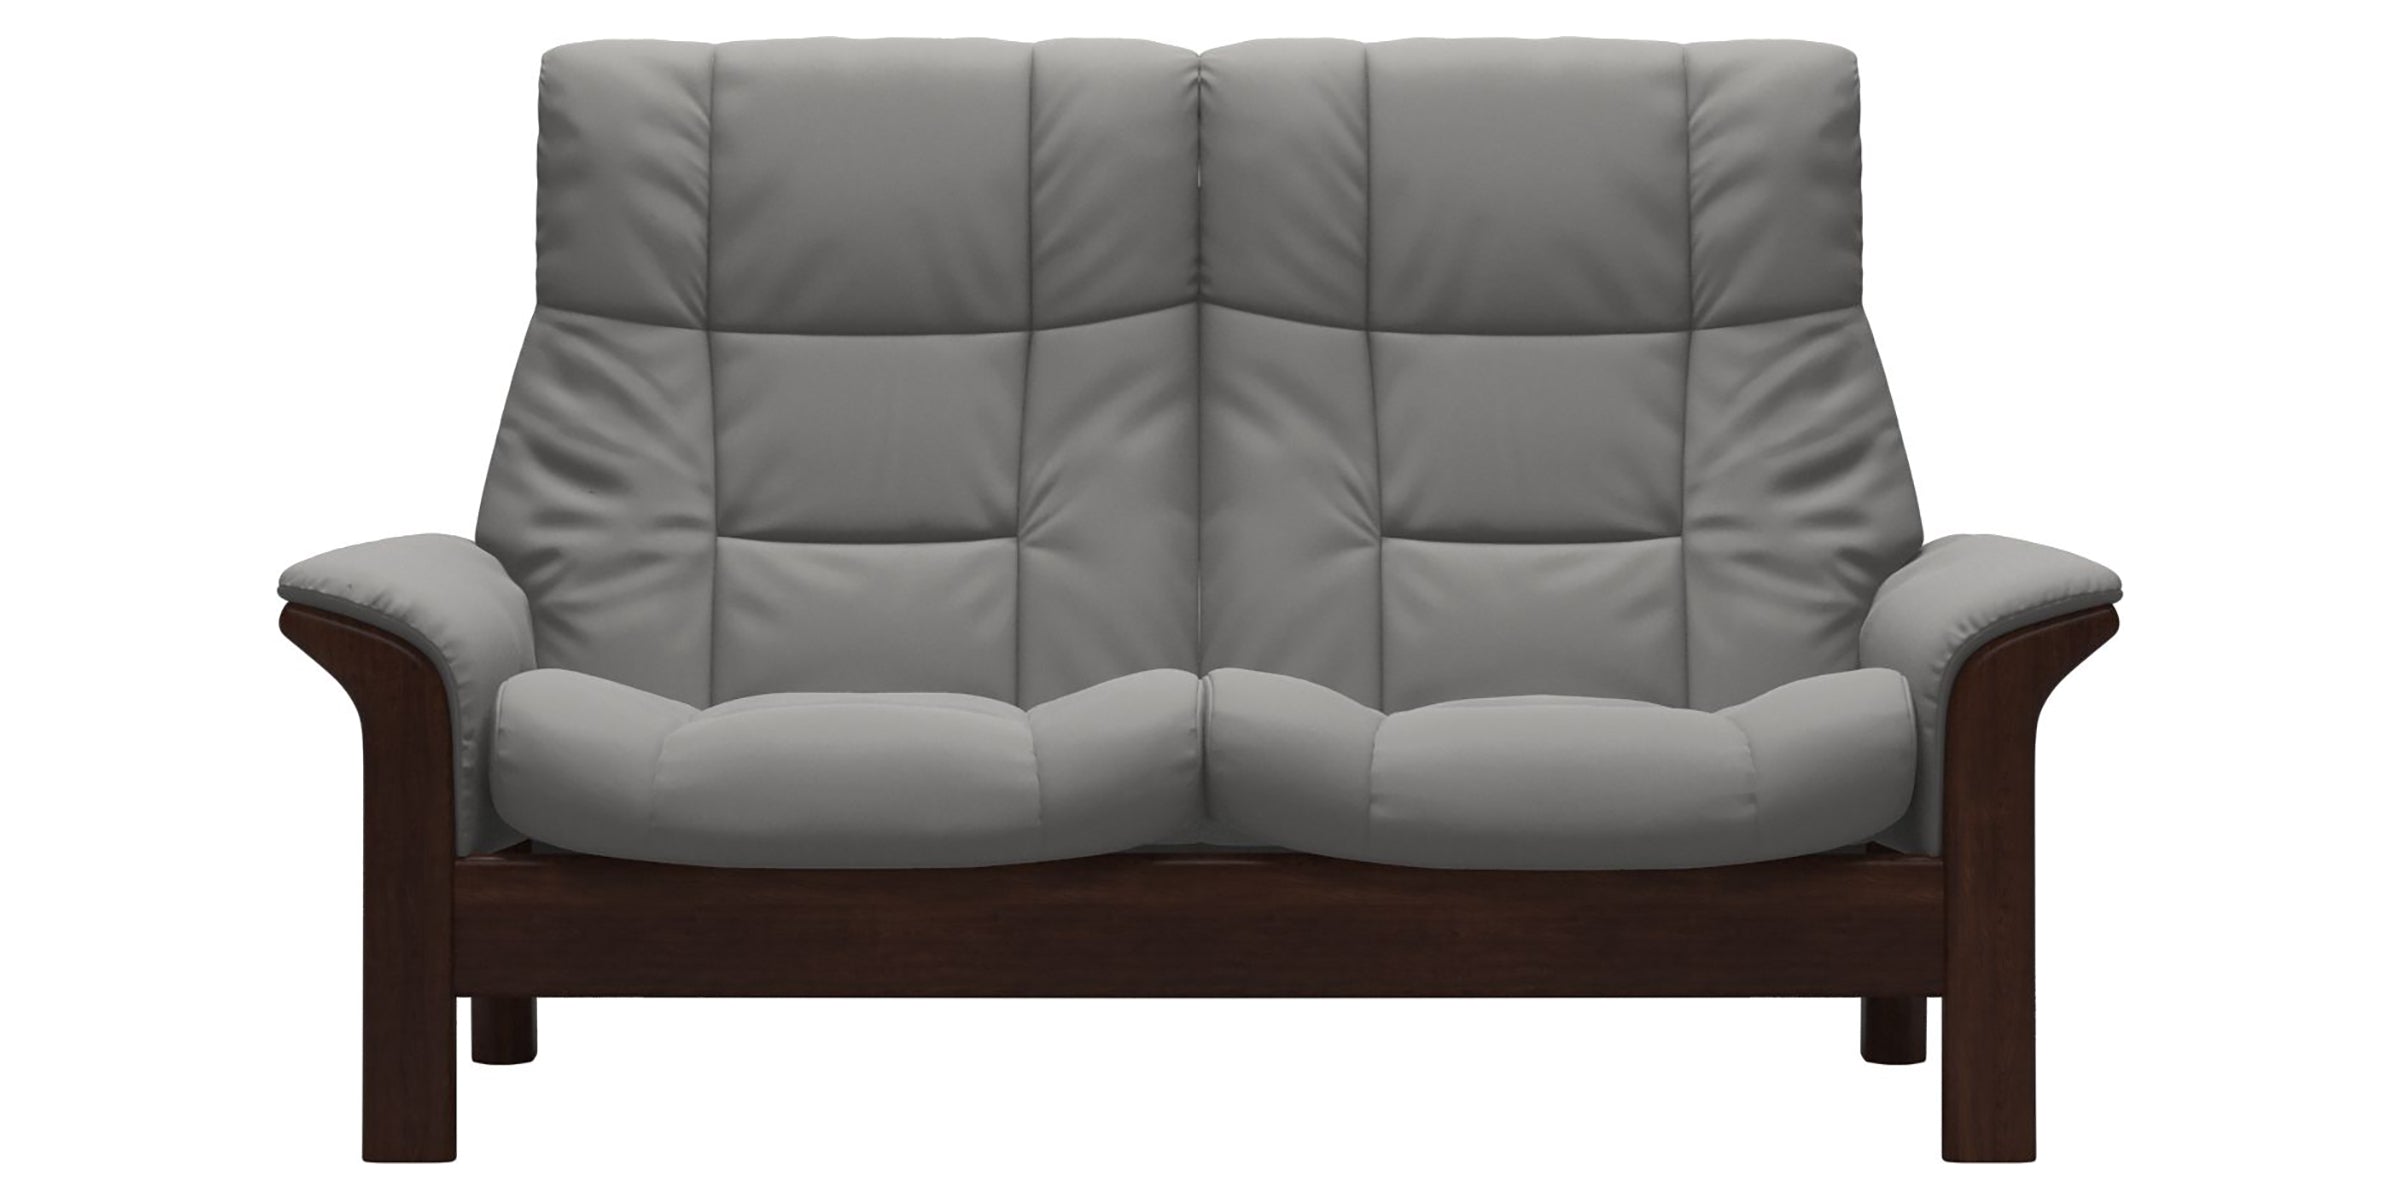 Paloma Leather Silver Grey and Brown Base | Stressless Buckingham 2-Seater High Back Sofa | Valley Ridge Furniture